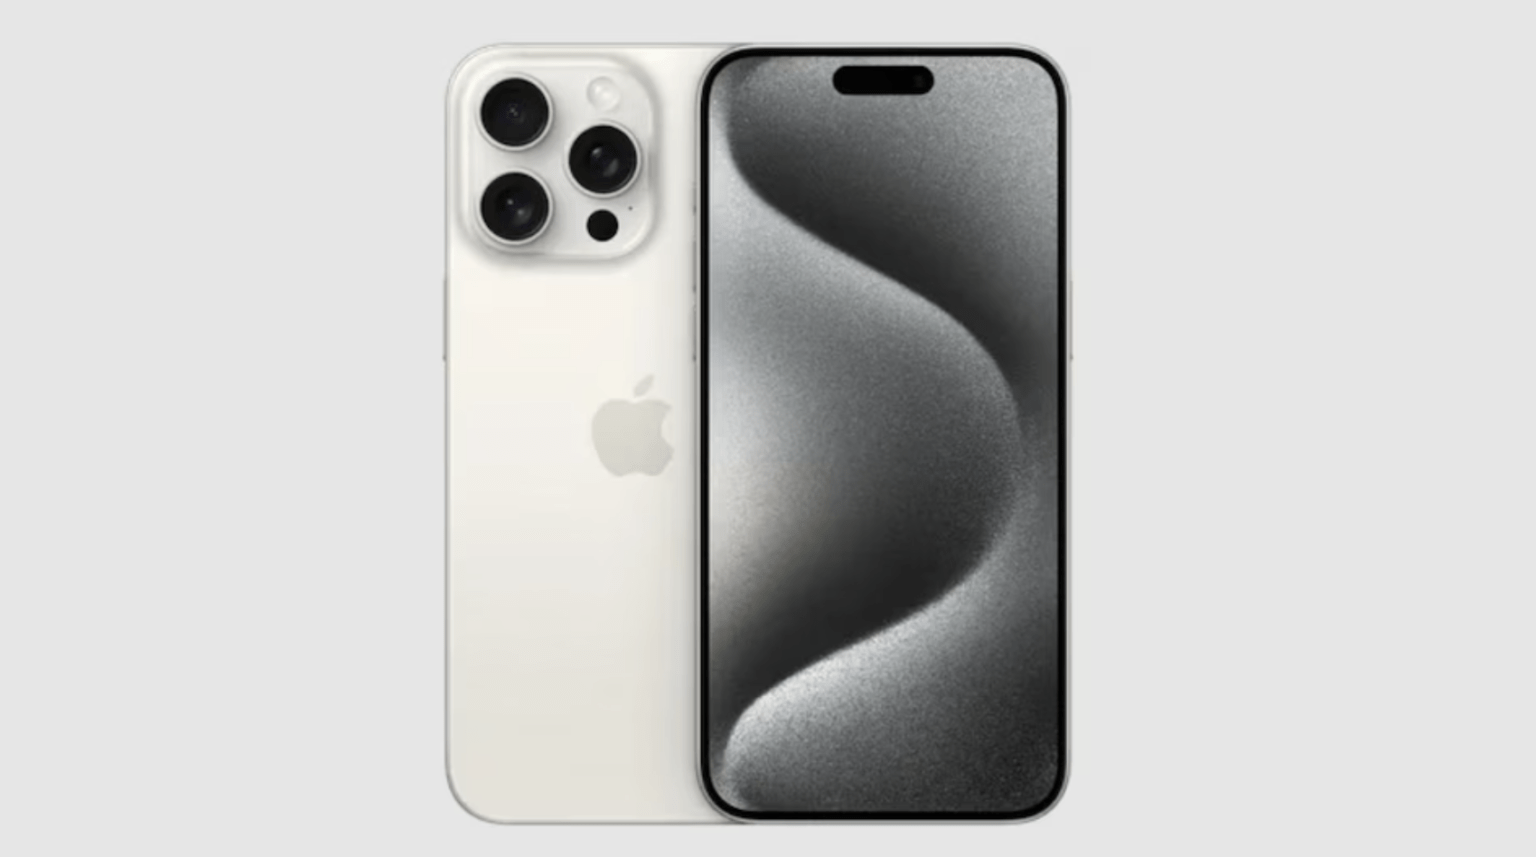 Render of the rumored iPhone 16 Pro Max showcasing its upgraded 48-megapixel main and ultra-wide cameras